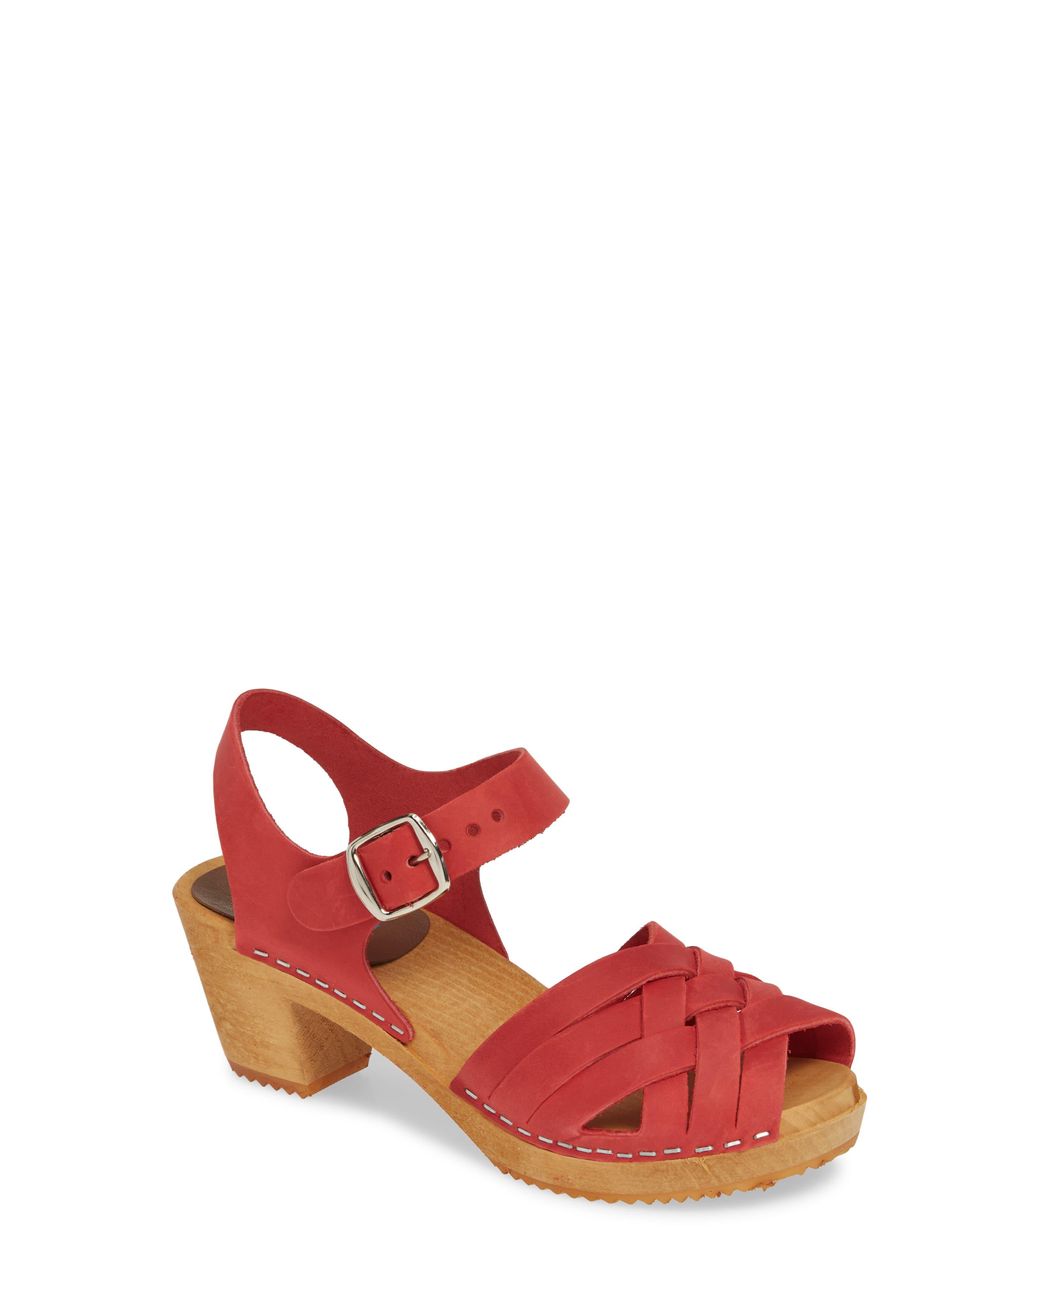 MIA Leather Bety Clog Sandal in Red Leather (Red) - Lyst